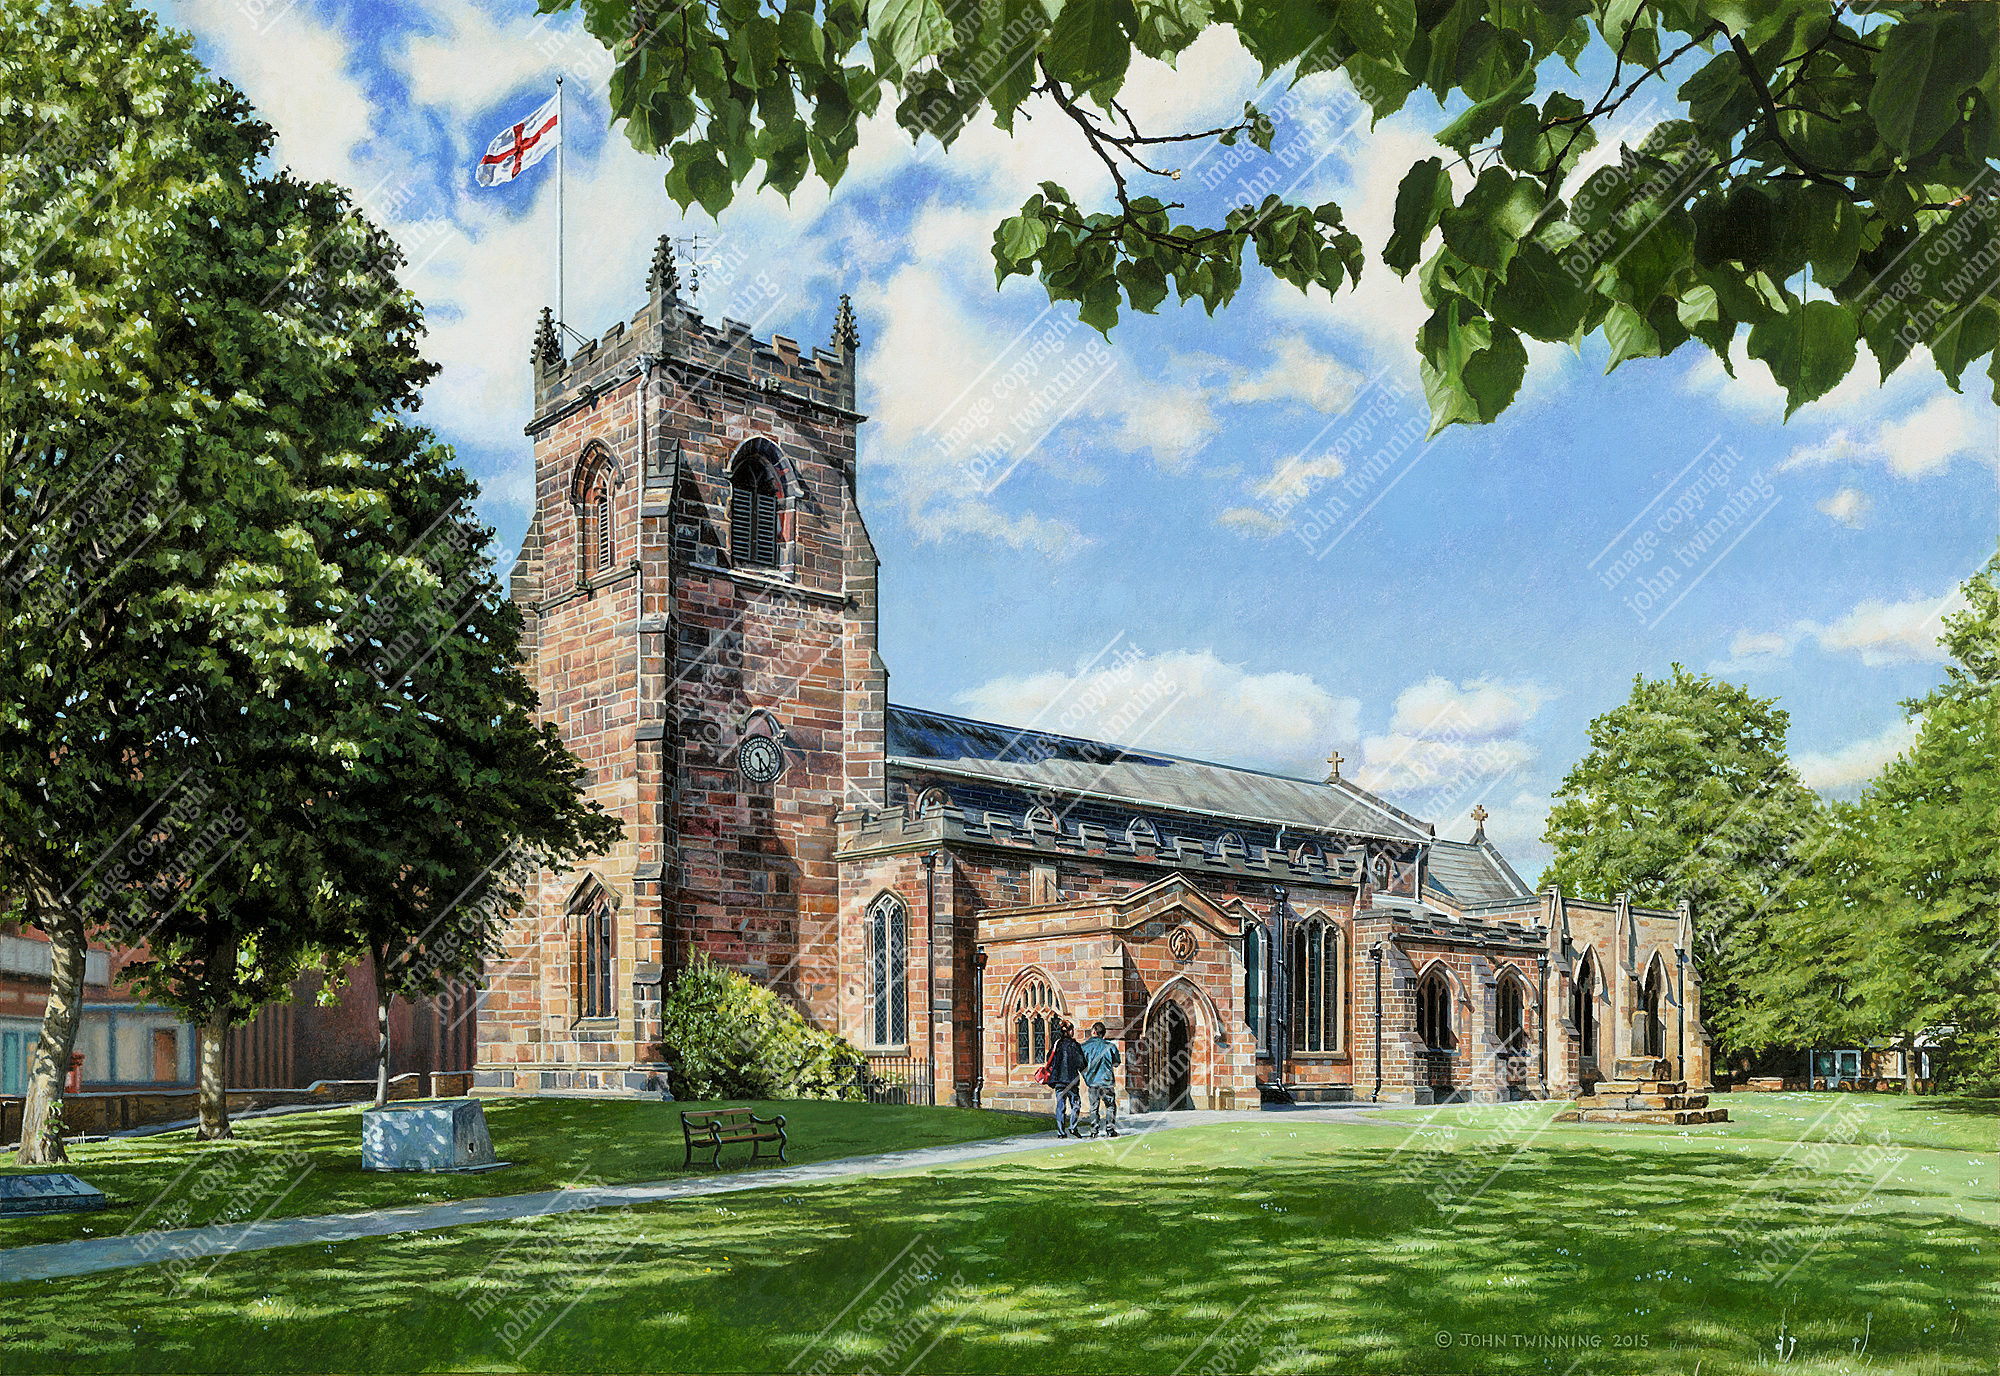 'St. Luke's Cannock, Early Summer' - art print from a commissioned painting of this staffordshire town's church